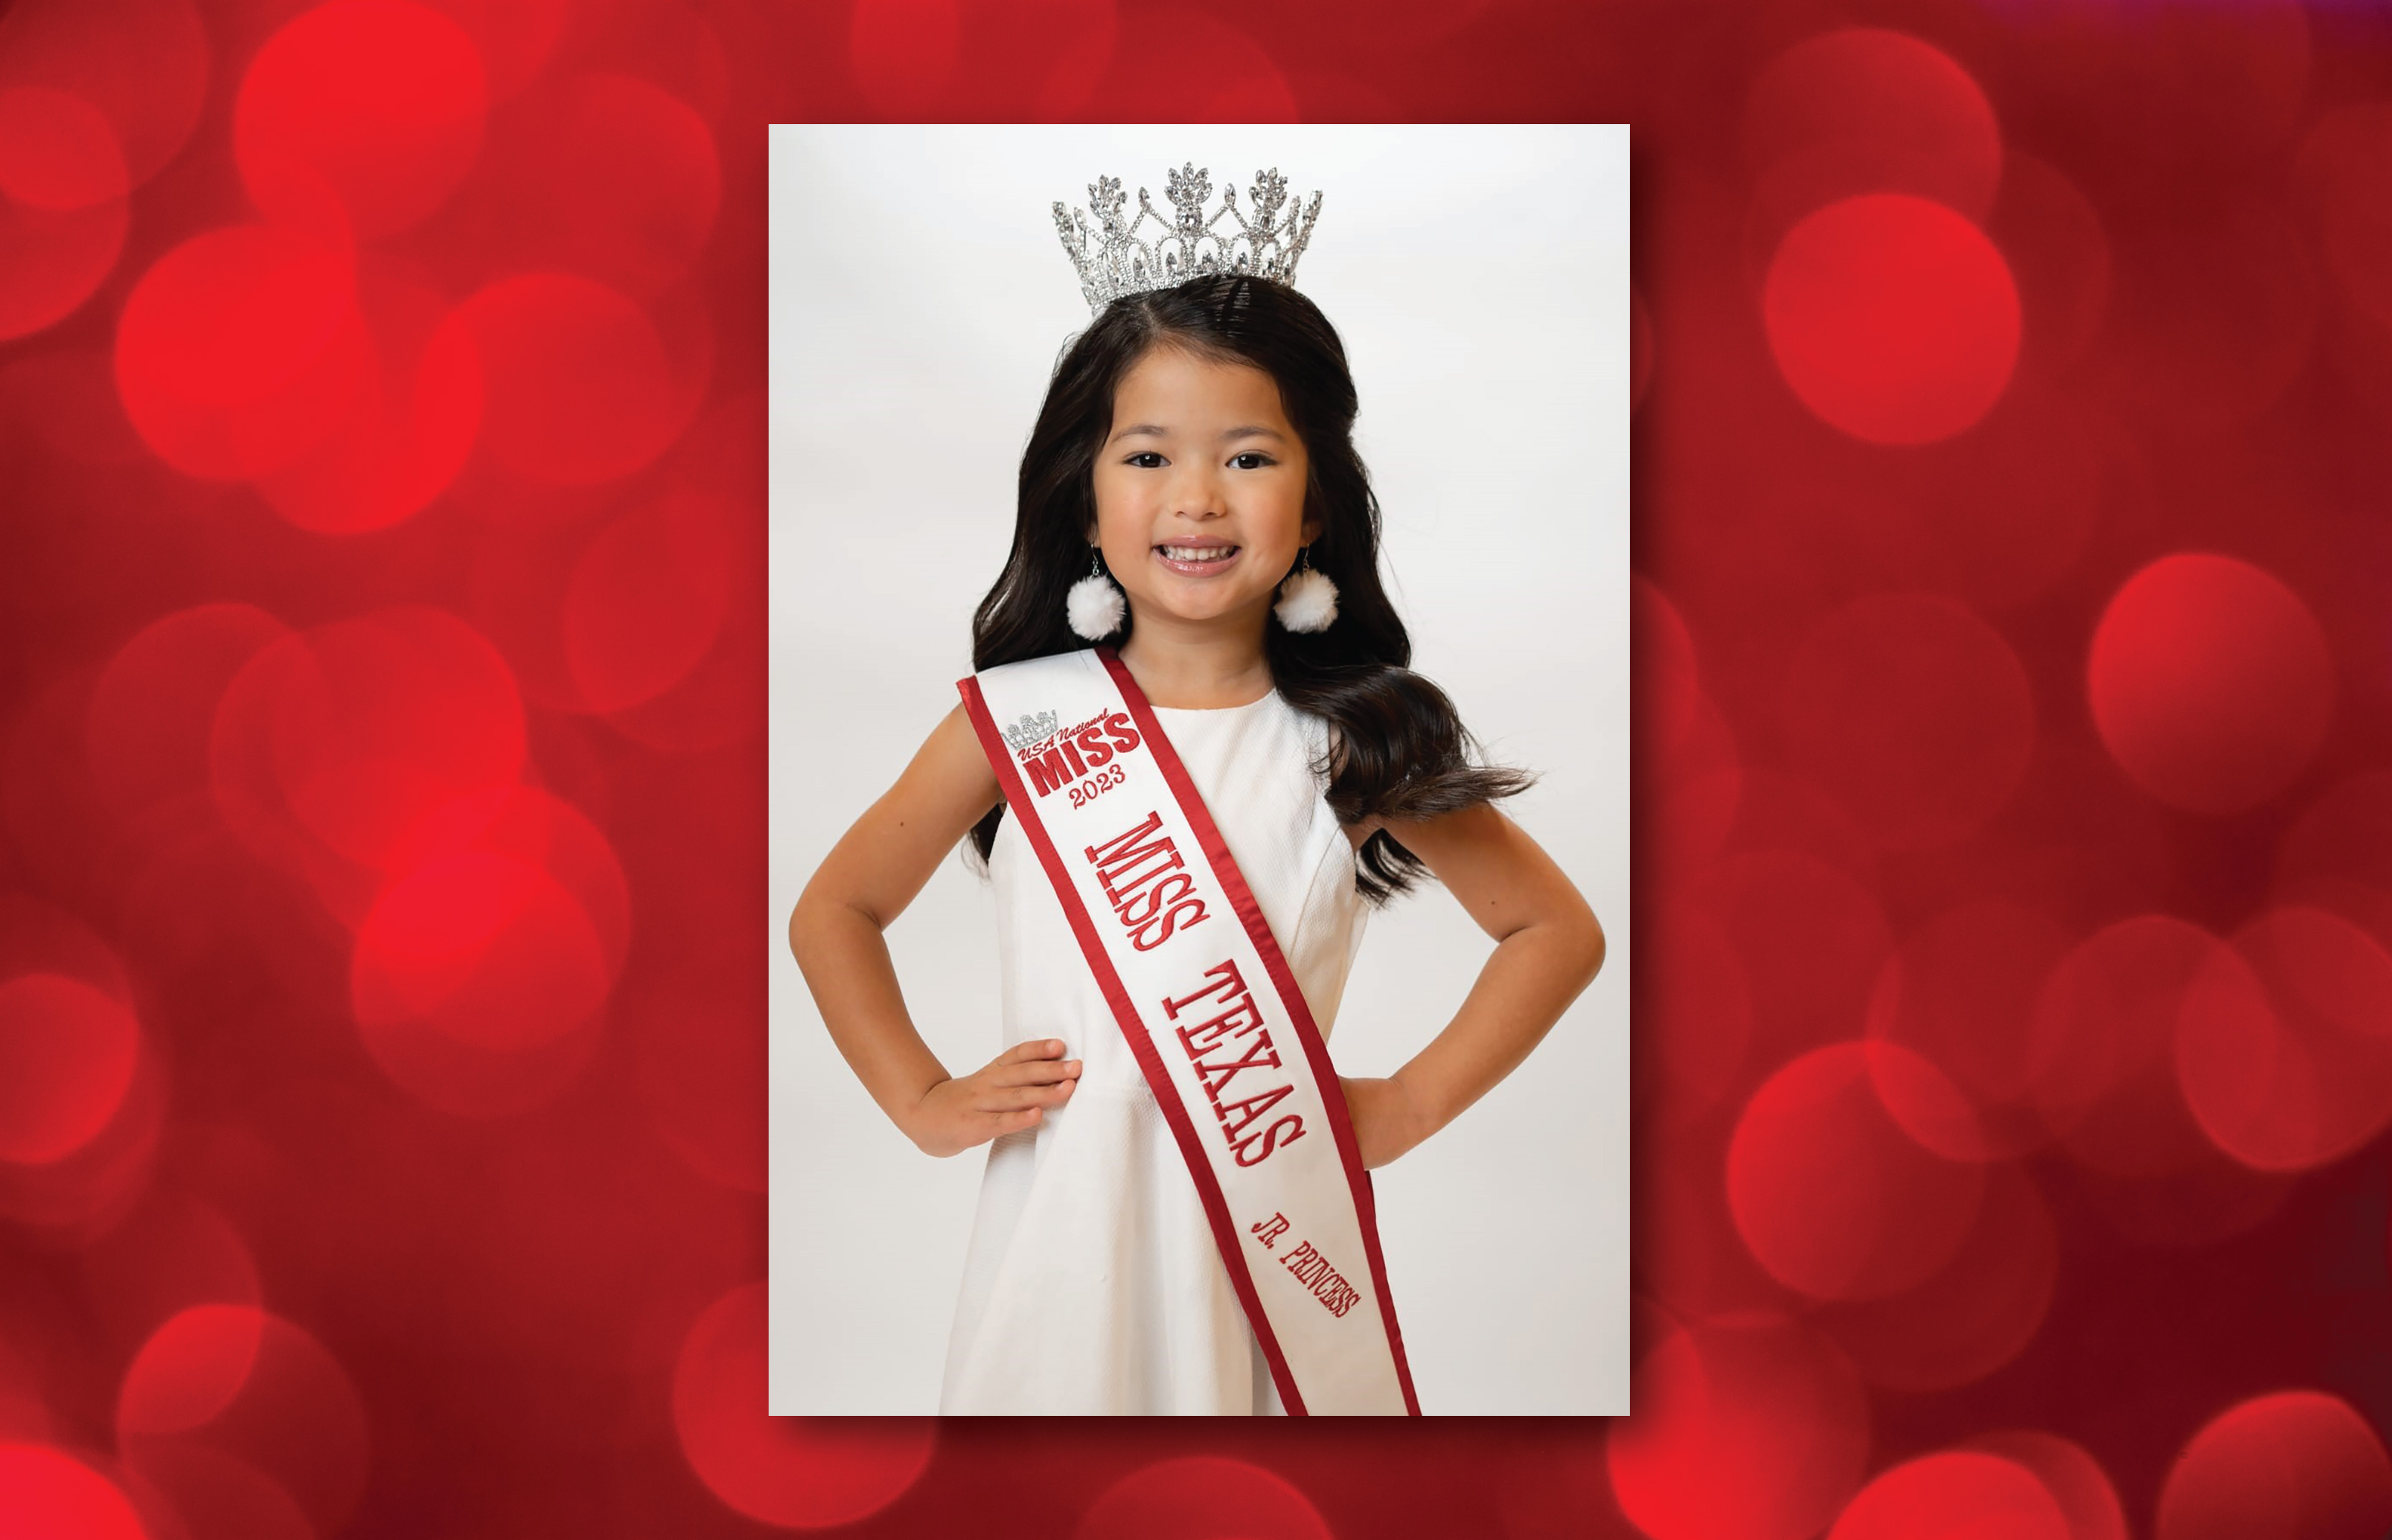 Pope ES Student Crowned USA National Miss Texas Junior Princess